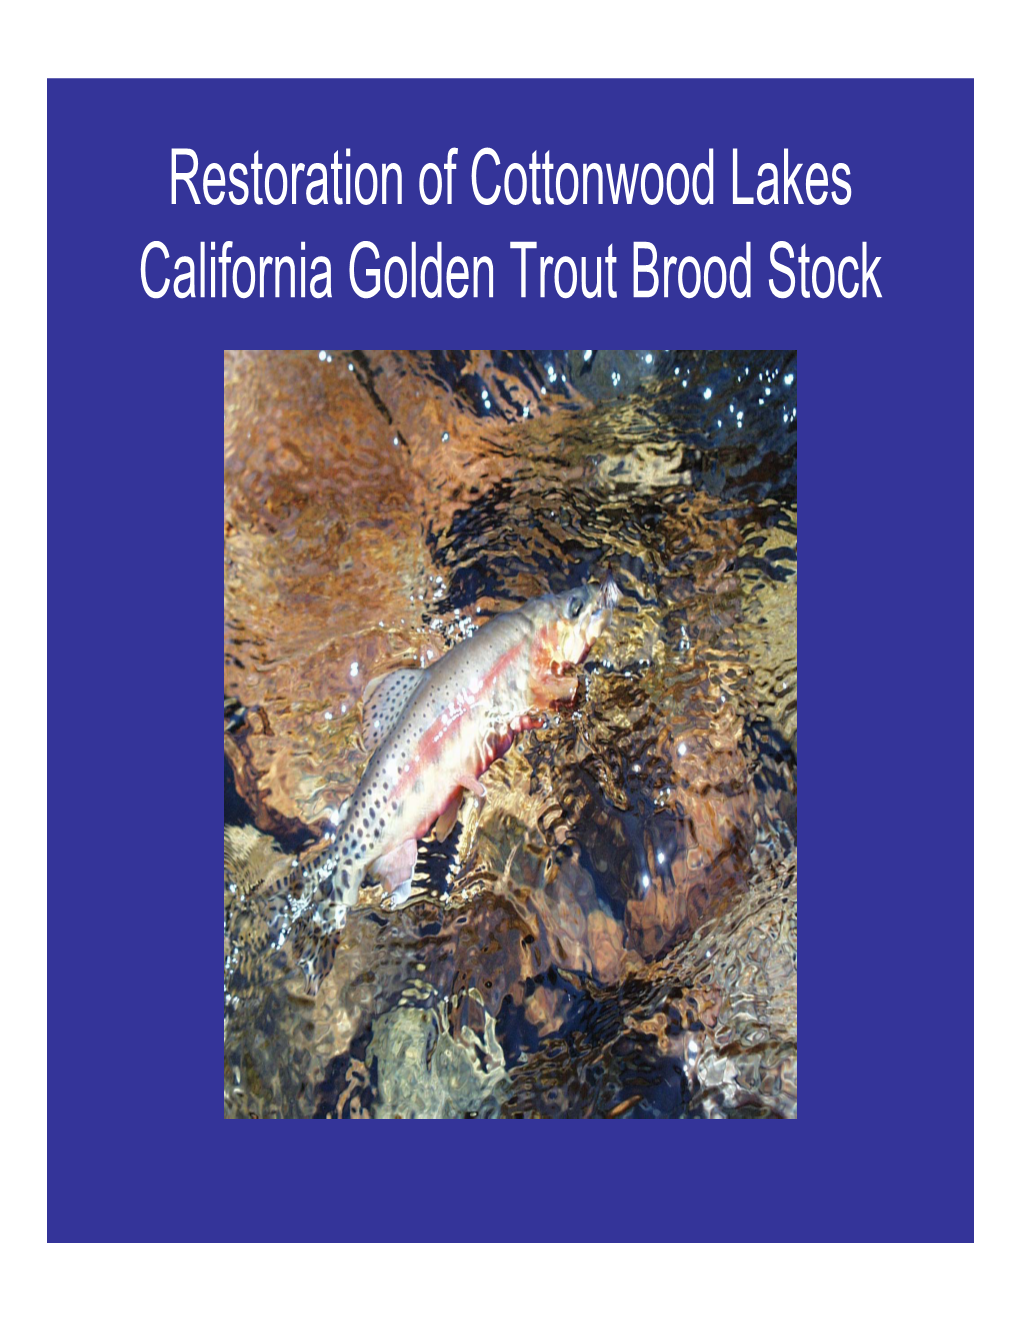 Restoration of Cottonwood Lakes California Golden Trout Brood Stock